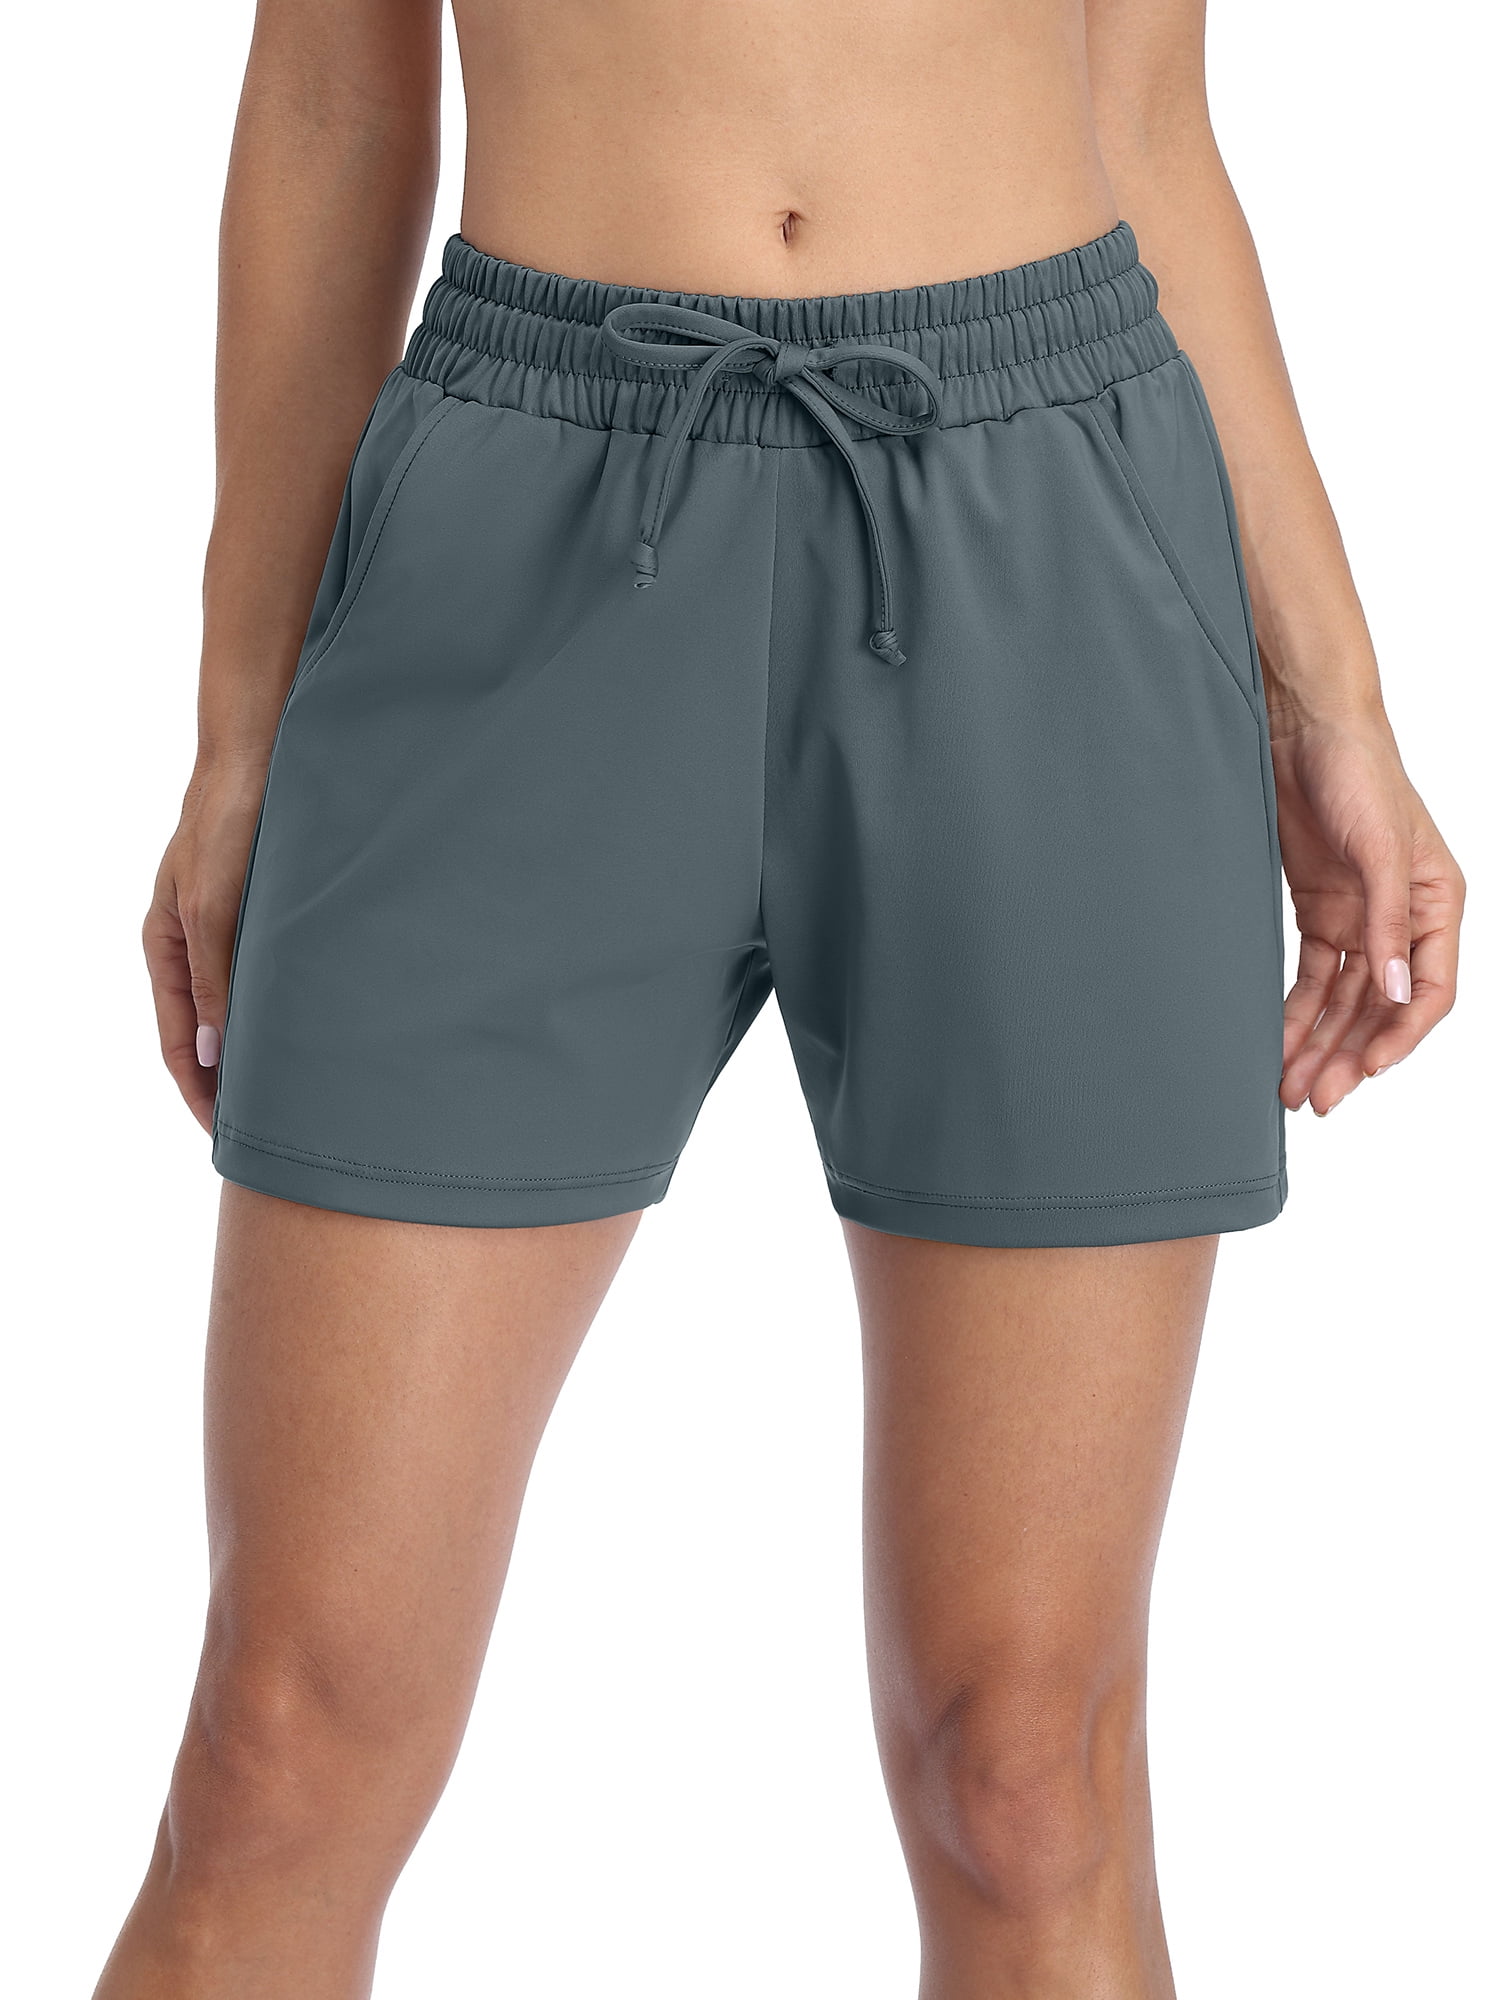 Promover Womens Workout Hiking Shorts Comfy 2.75 Athletic Running Lounge Shorts with Pockets UPF 50+ 